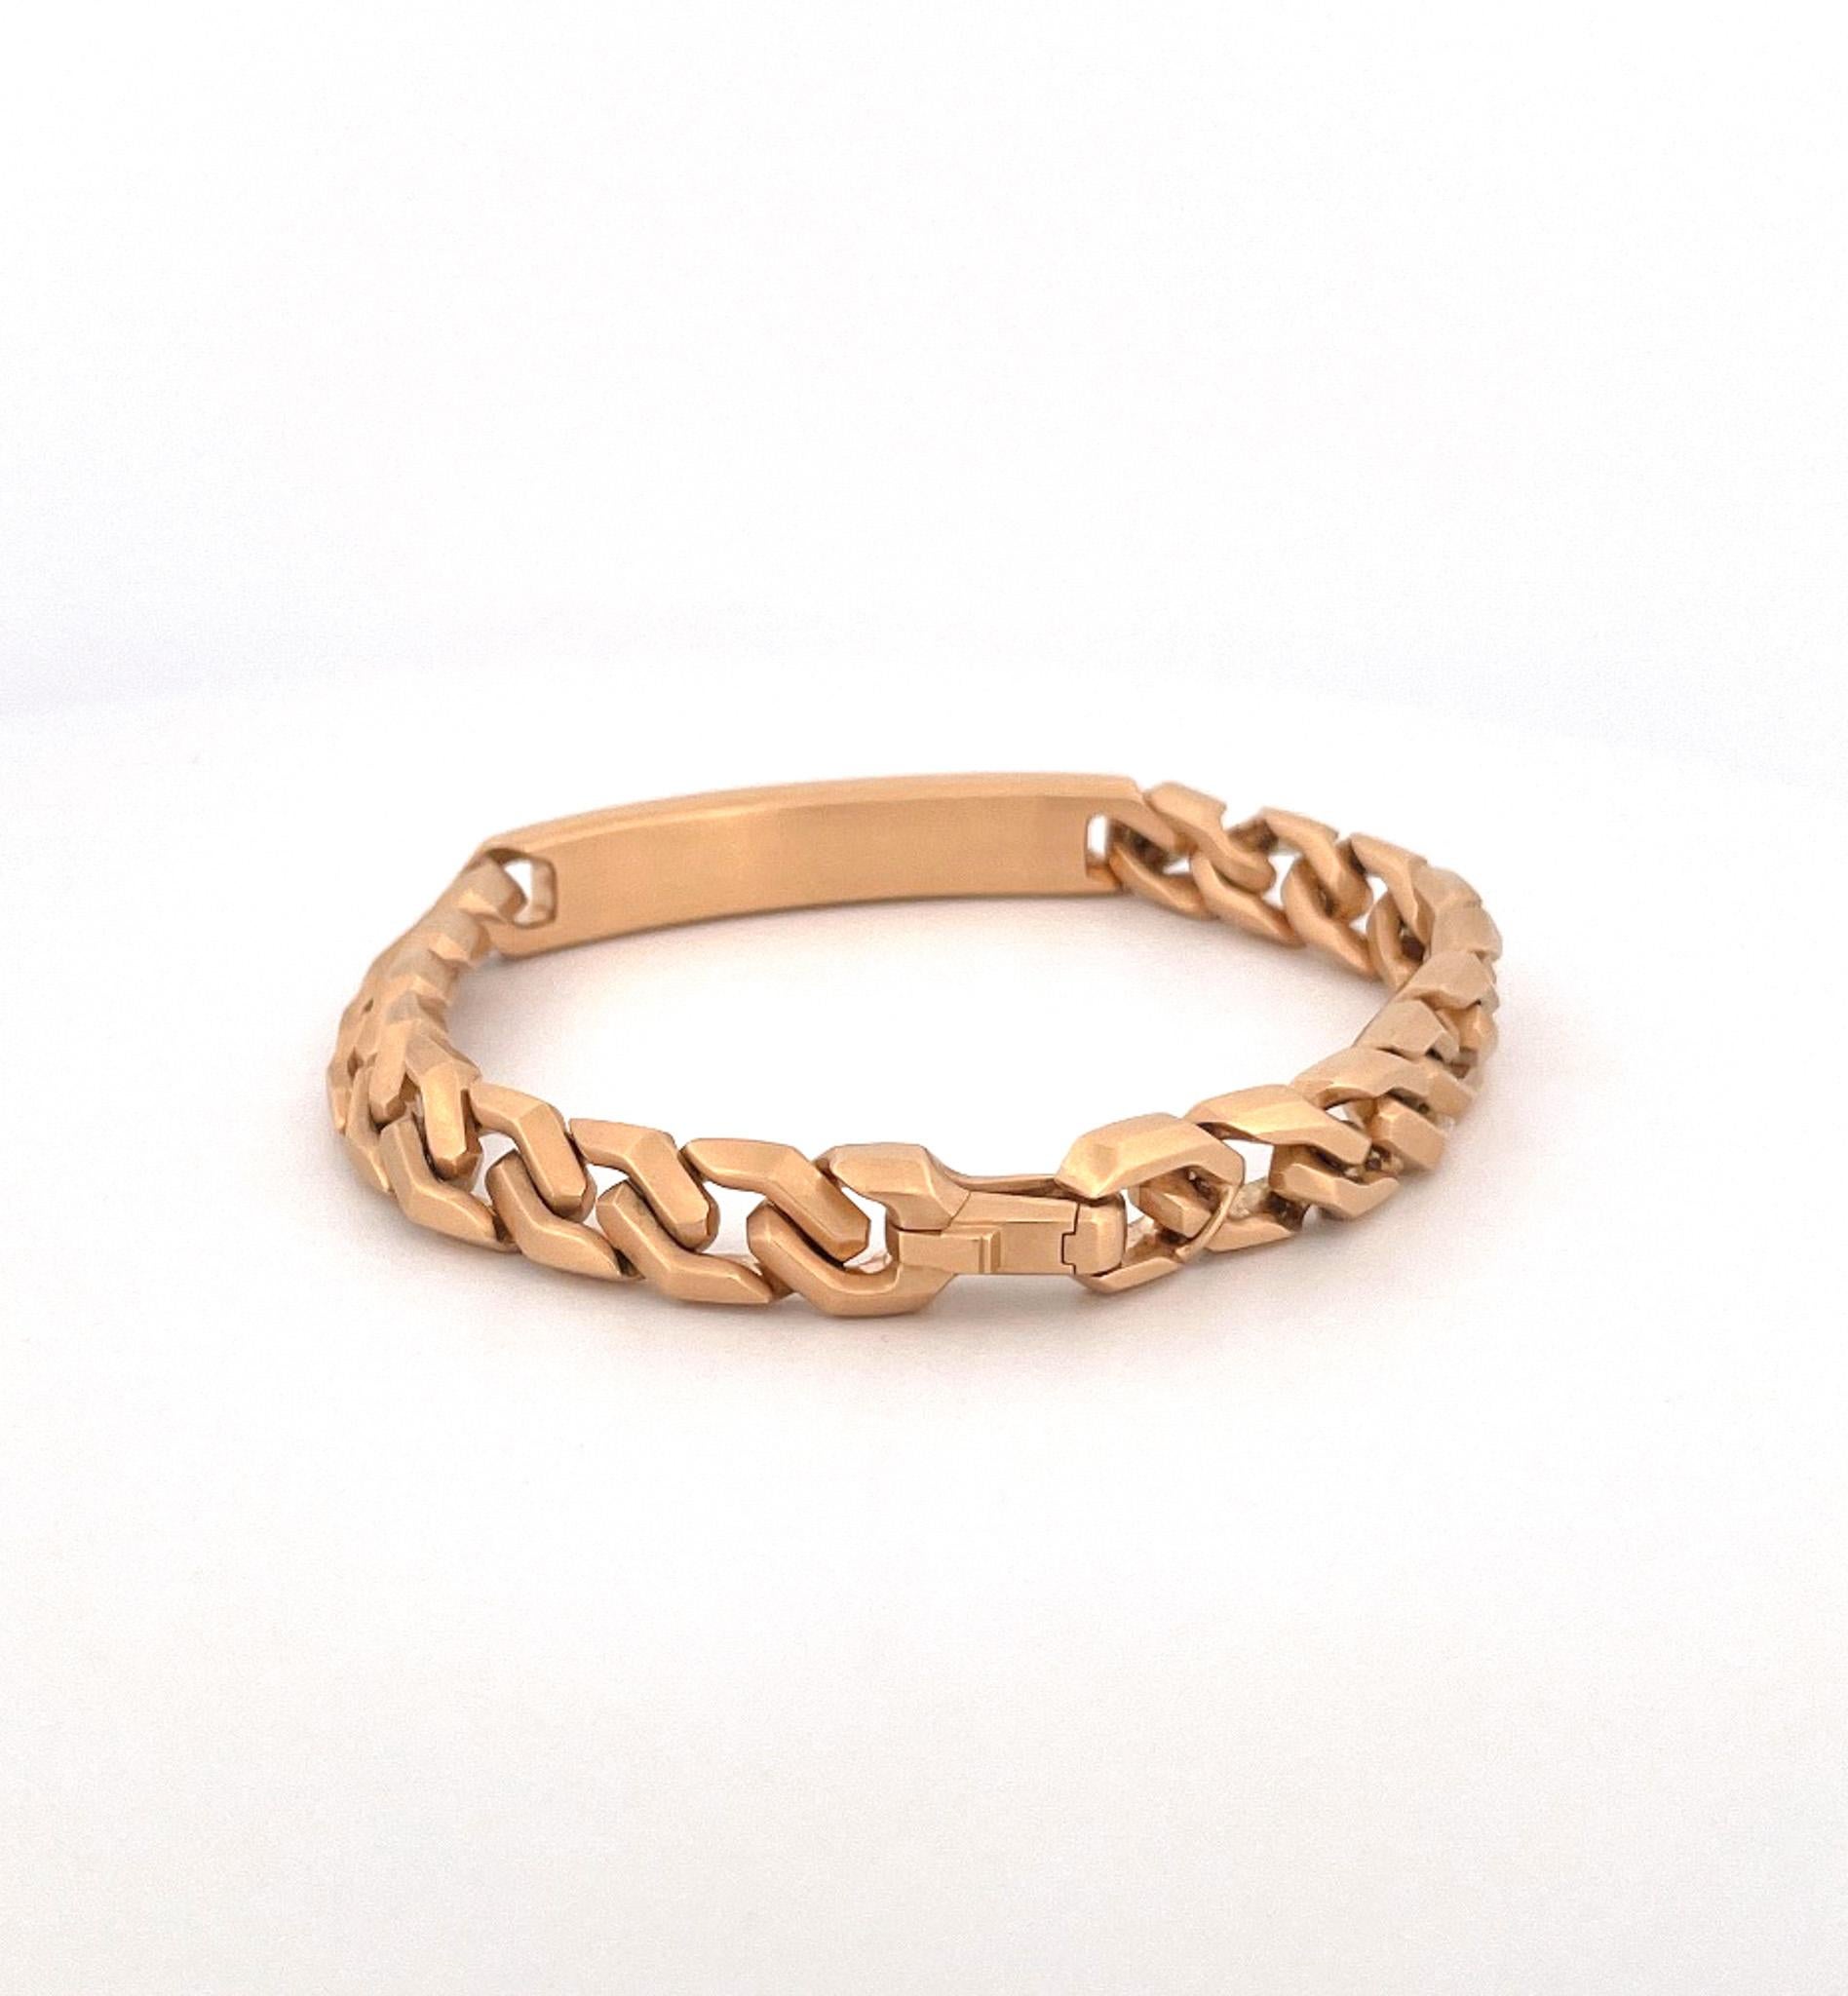 From designer David Yurman, circa 1990s, 18 karat yellow gold name plate bracelet. This bracelet is crafted with 9 MM brushed finish plate set along an 8-inch chain. This bracelet is a part of the Eiseman Estate Jewelry Collection.